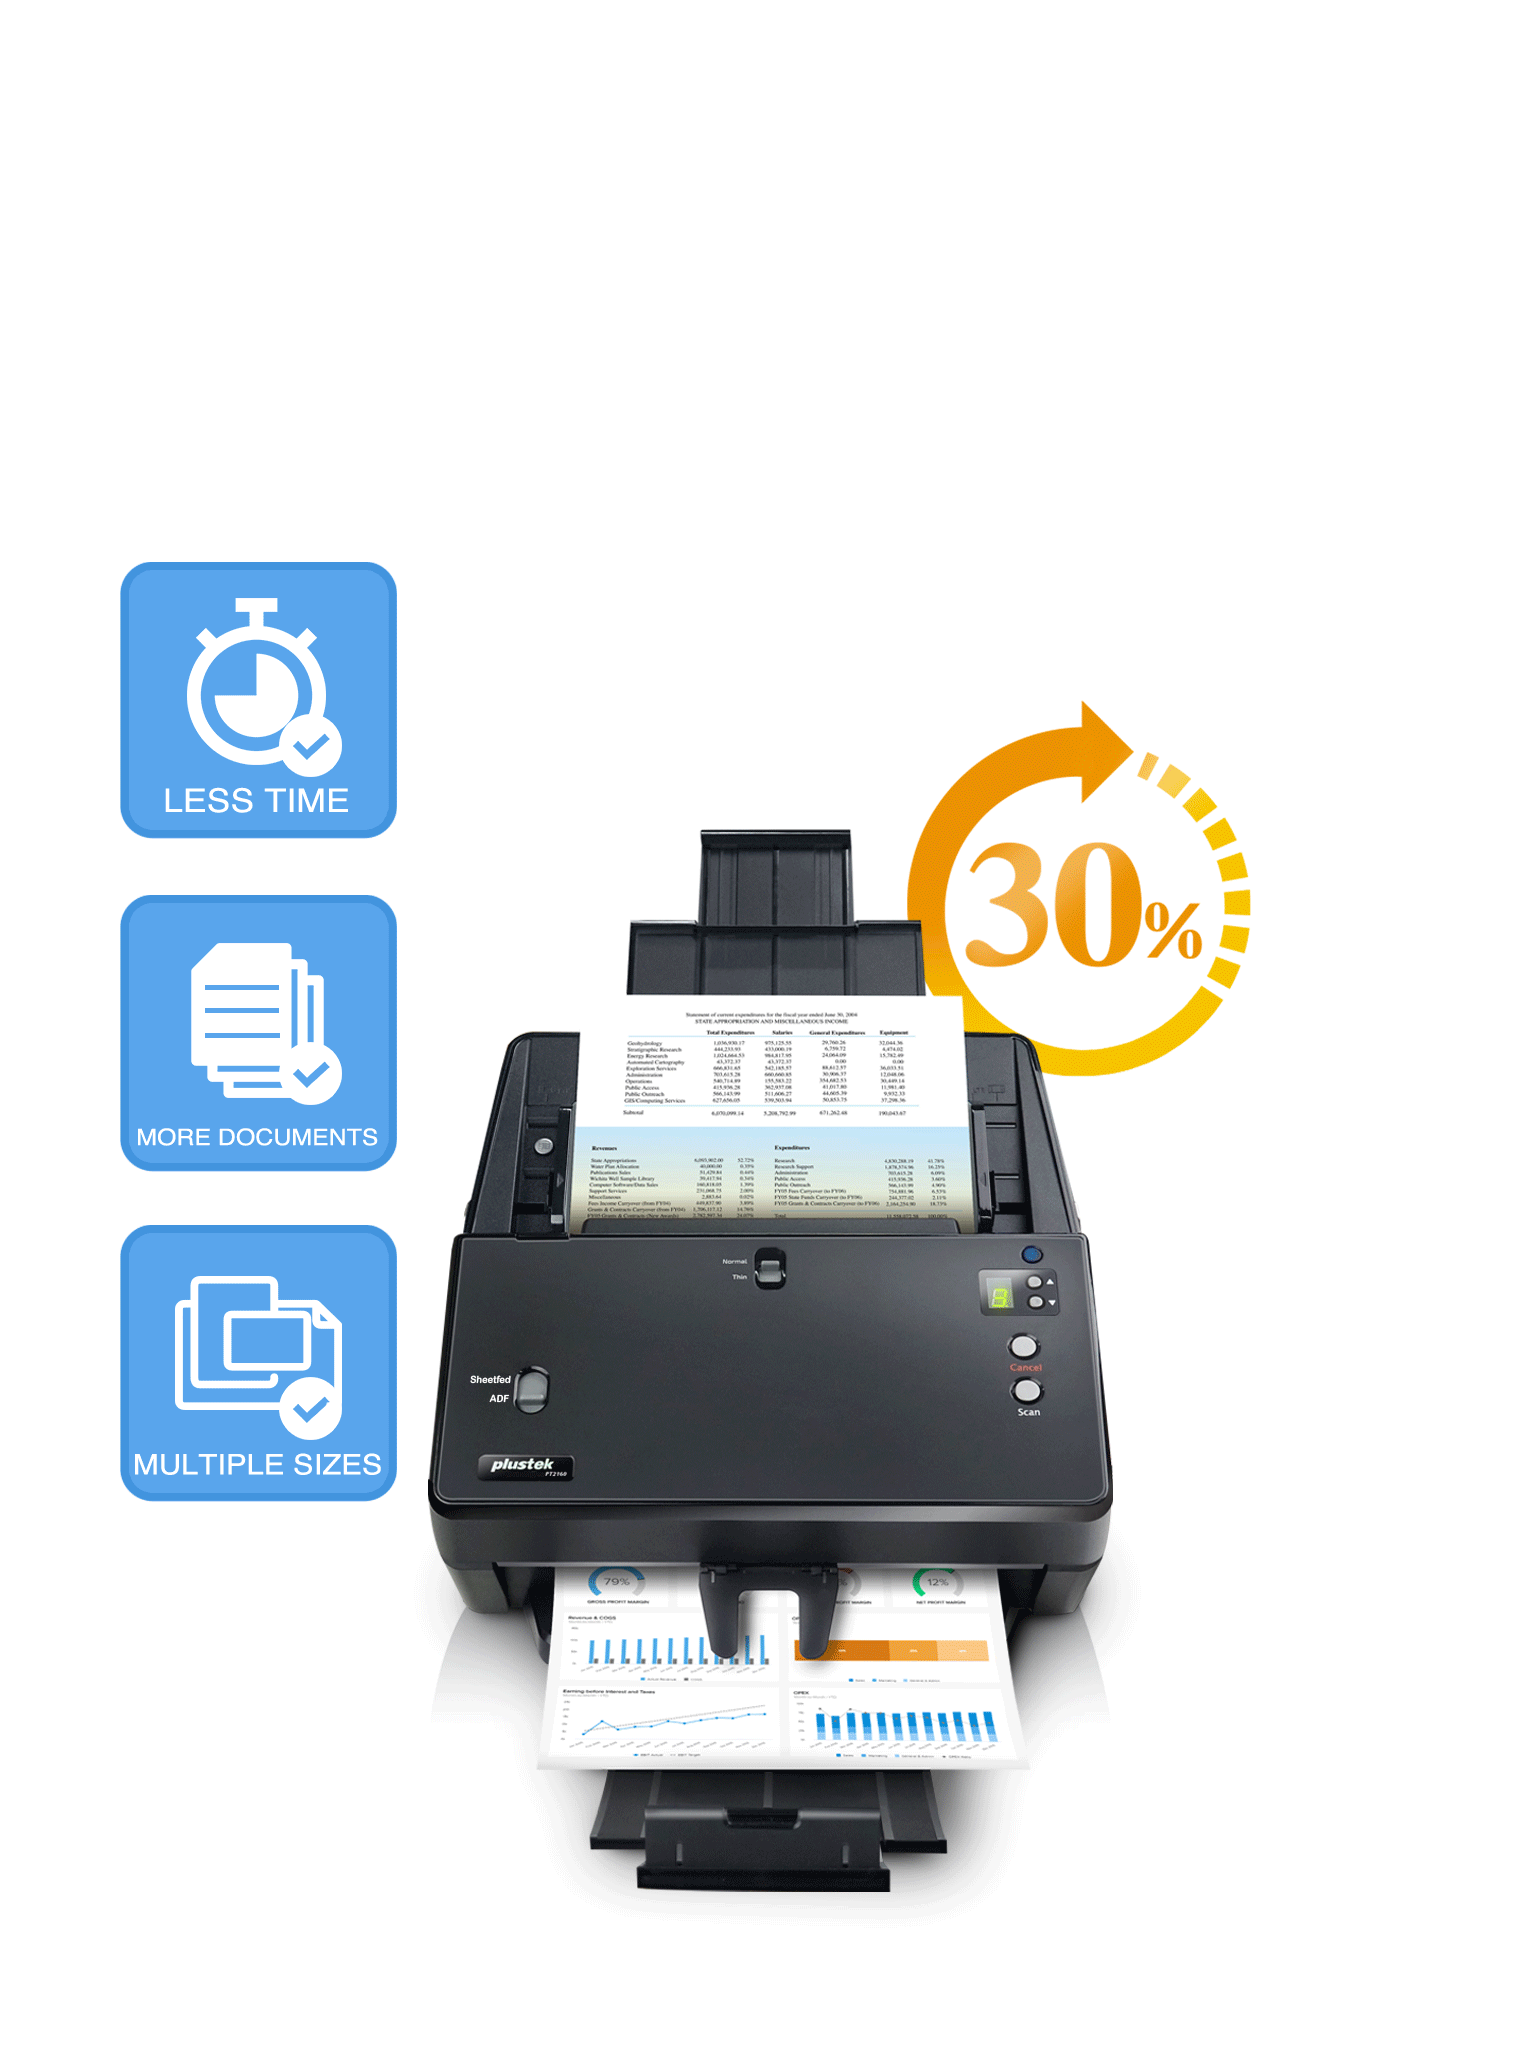 Scan more documents and spend less time.